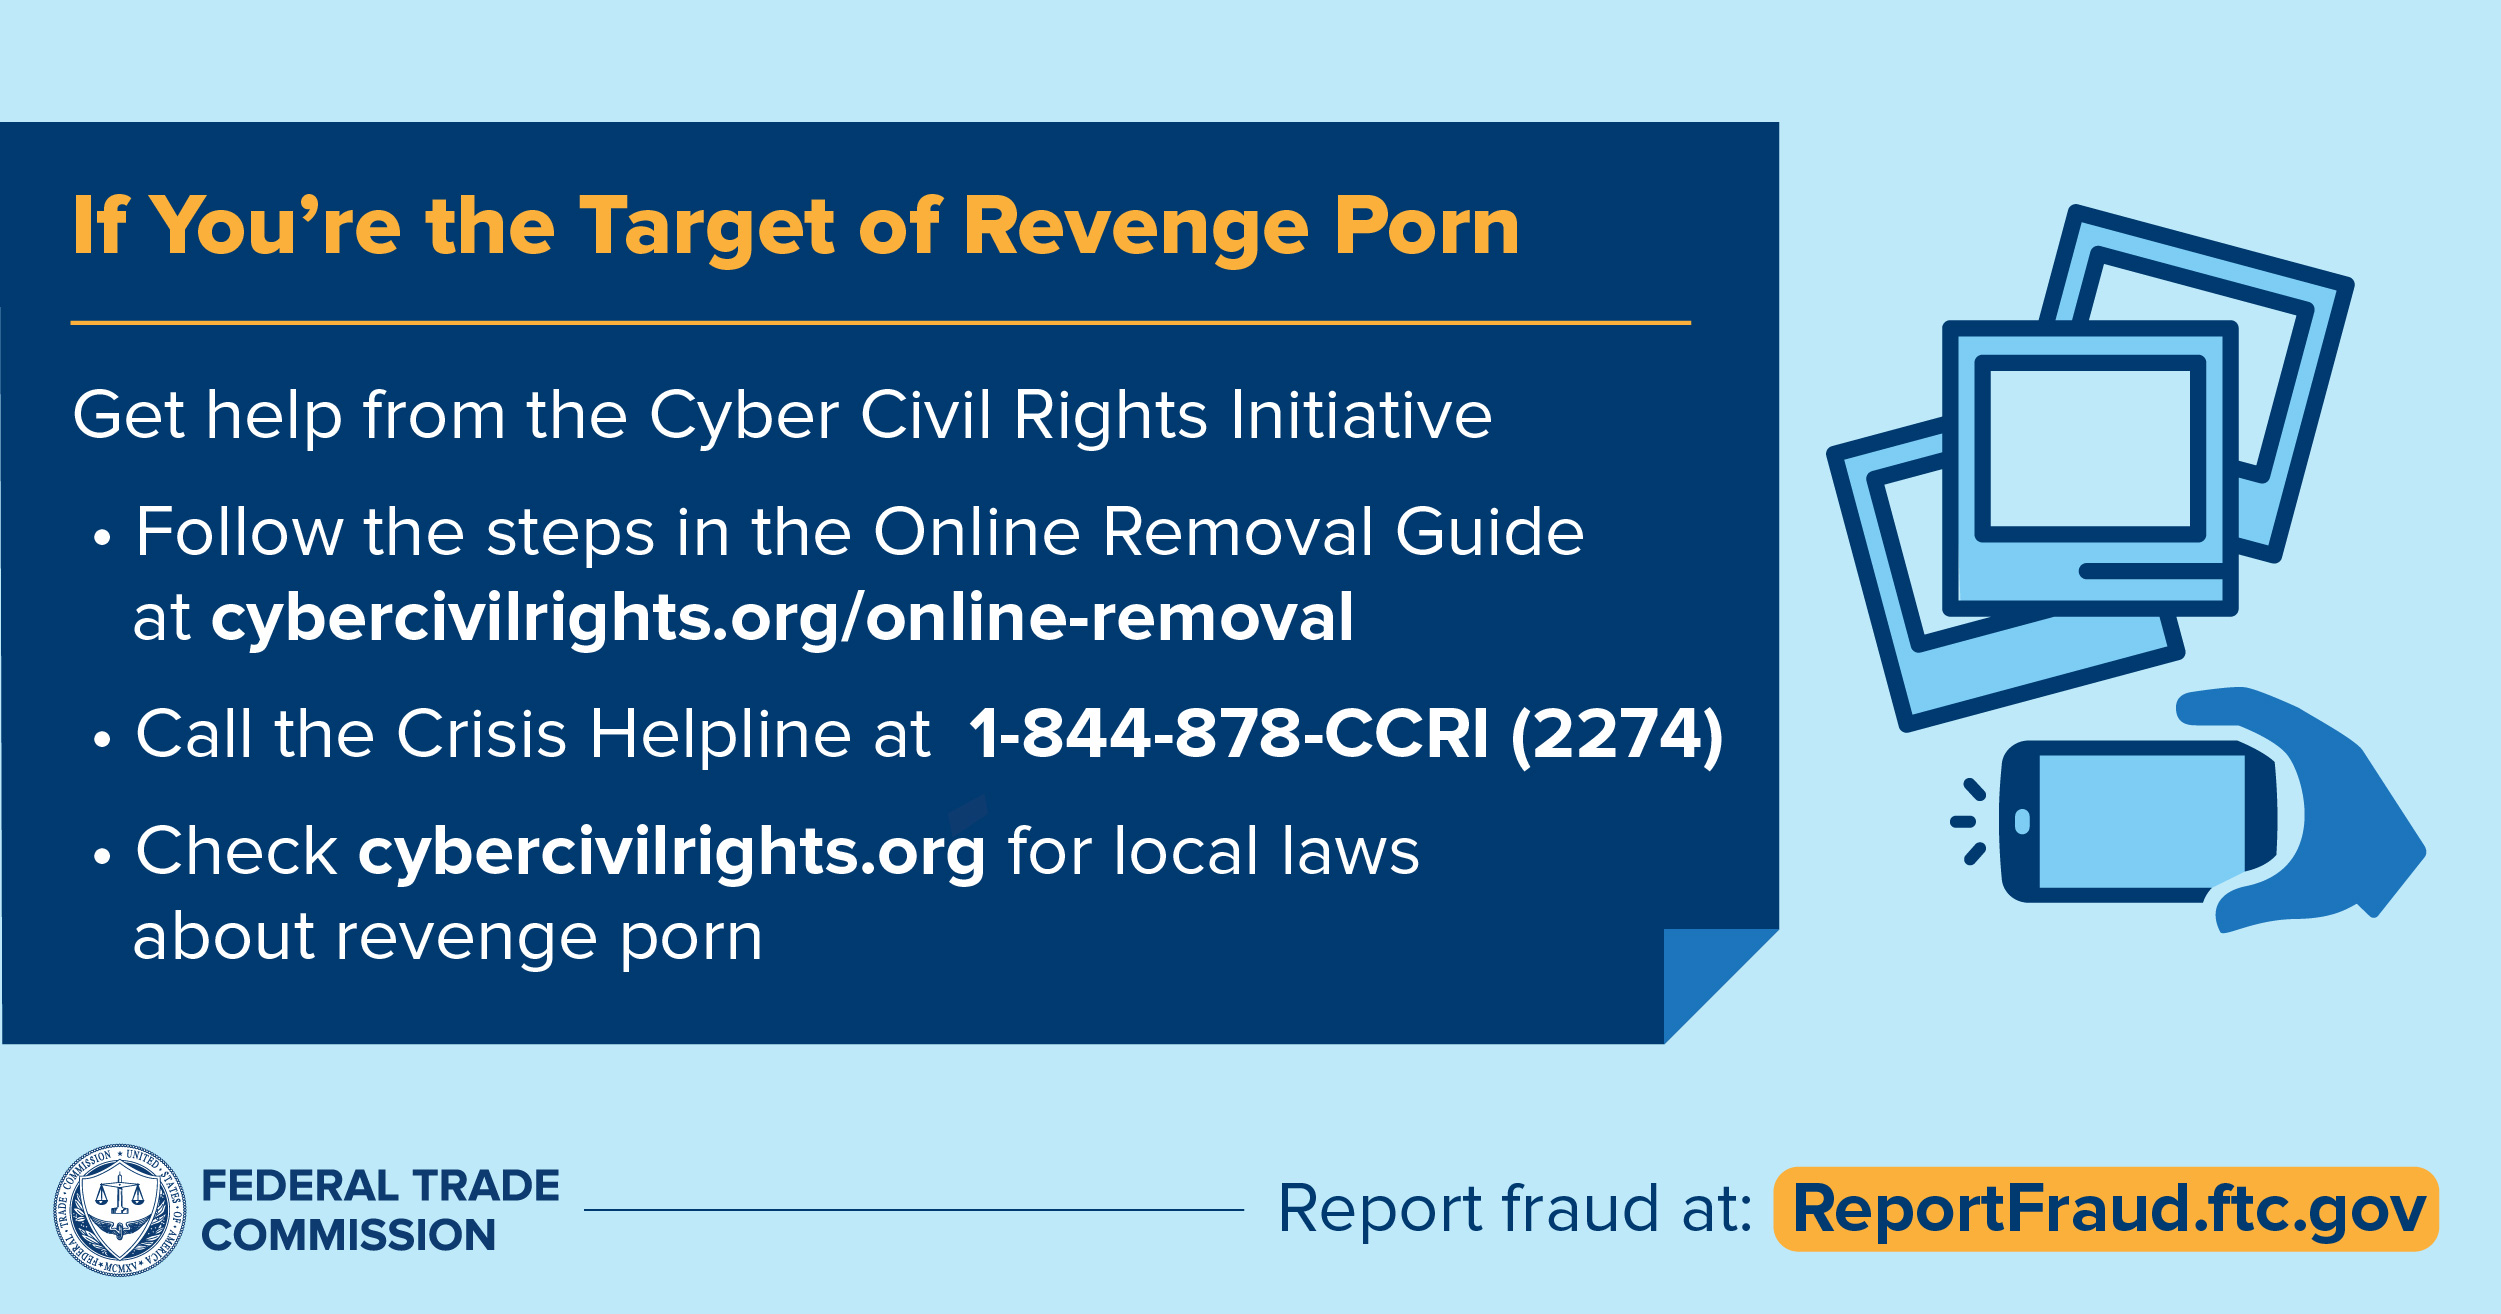 Revenge Pornography - What To Do if You're the Target of Revenge Porn | Consumer Advice